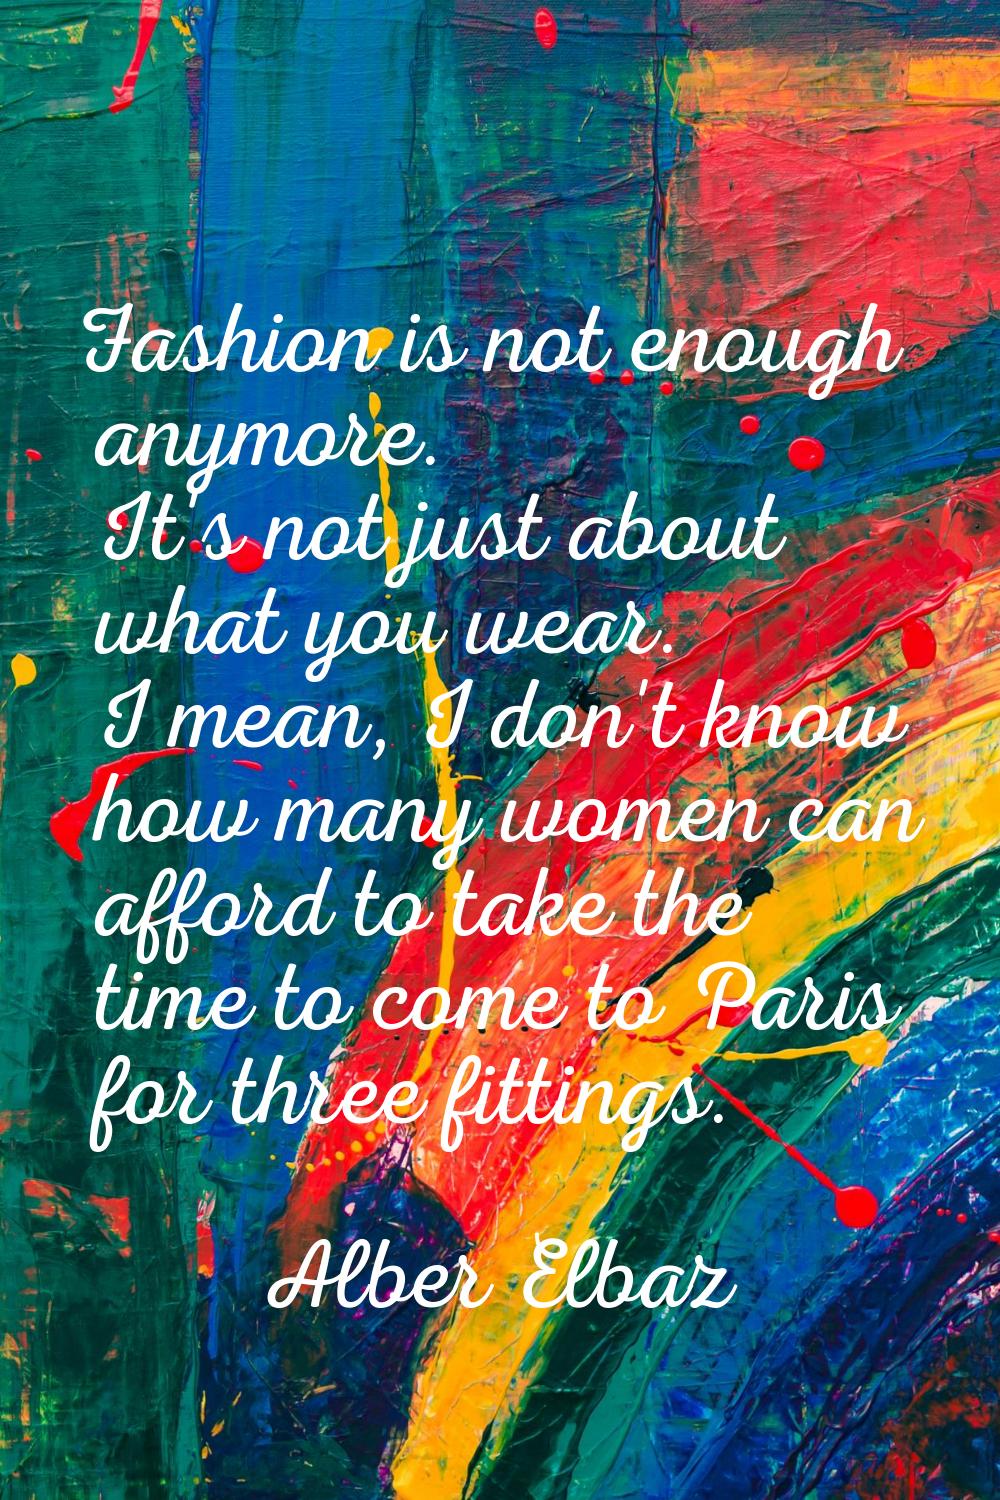 Fashion is not enough anymore. It's not just about what you wear. I mean, I don't know how many wom